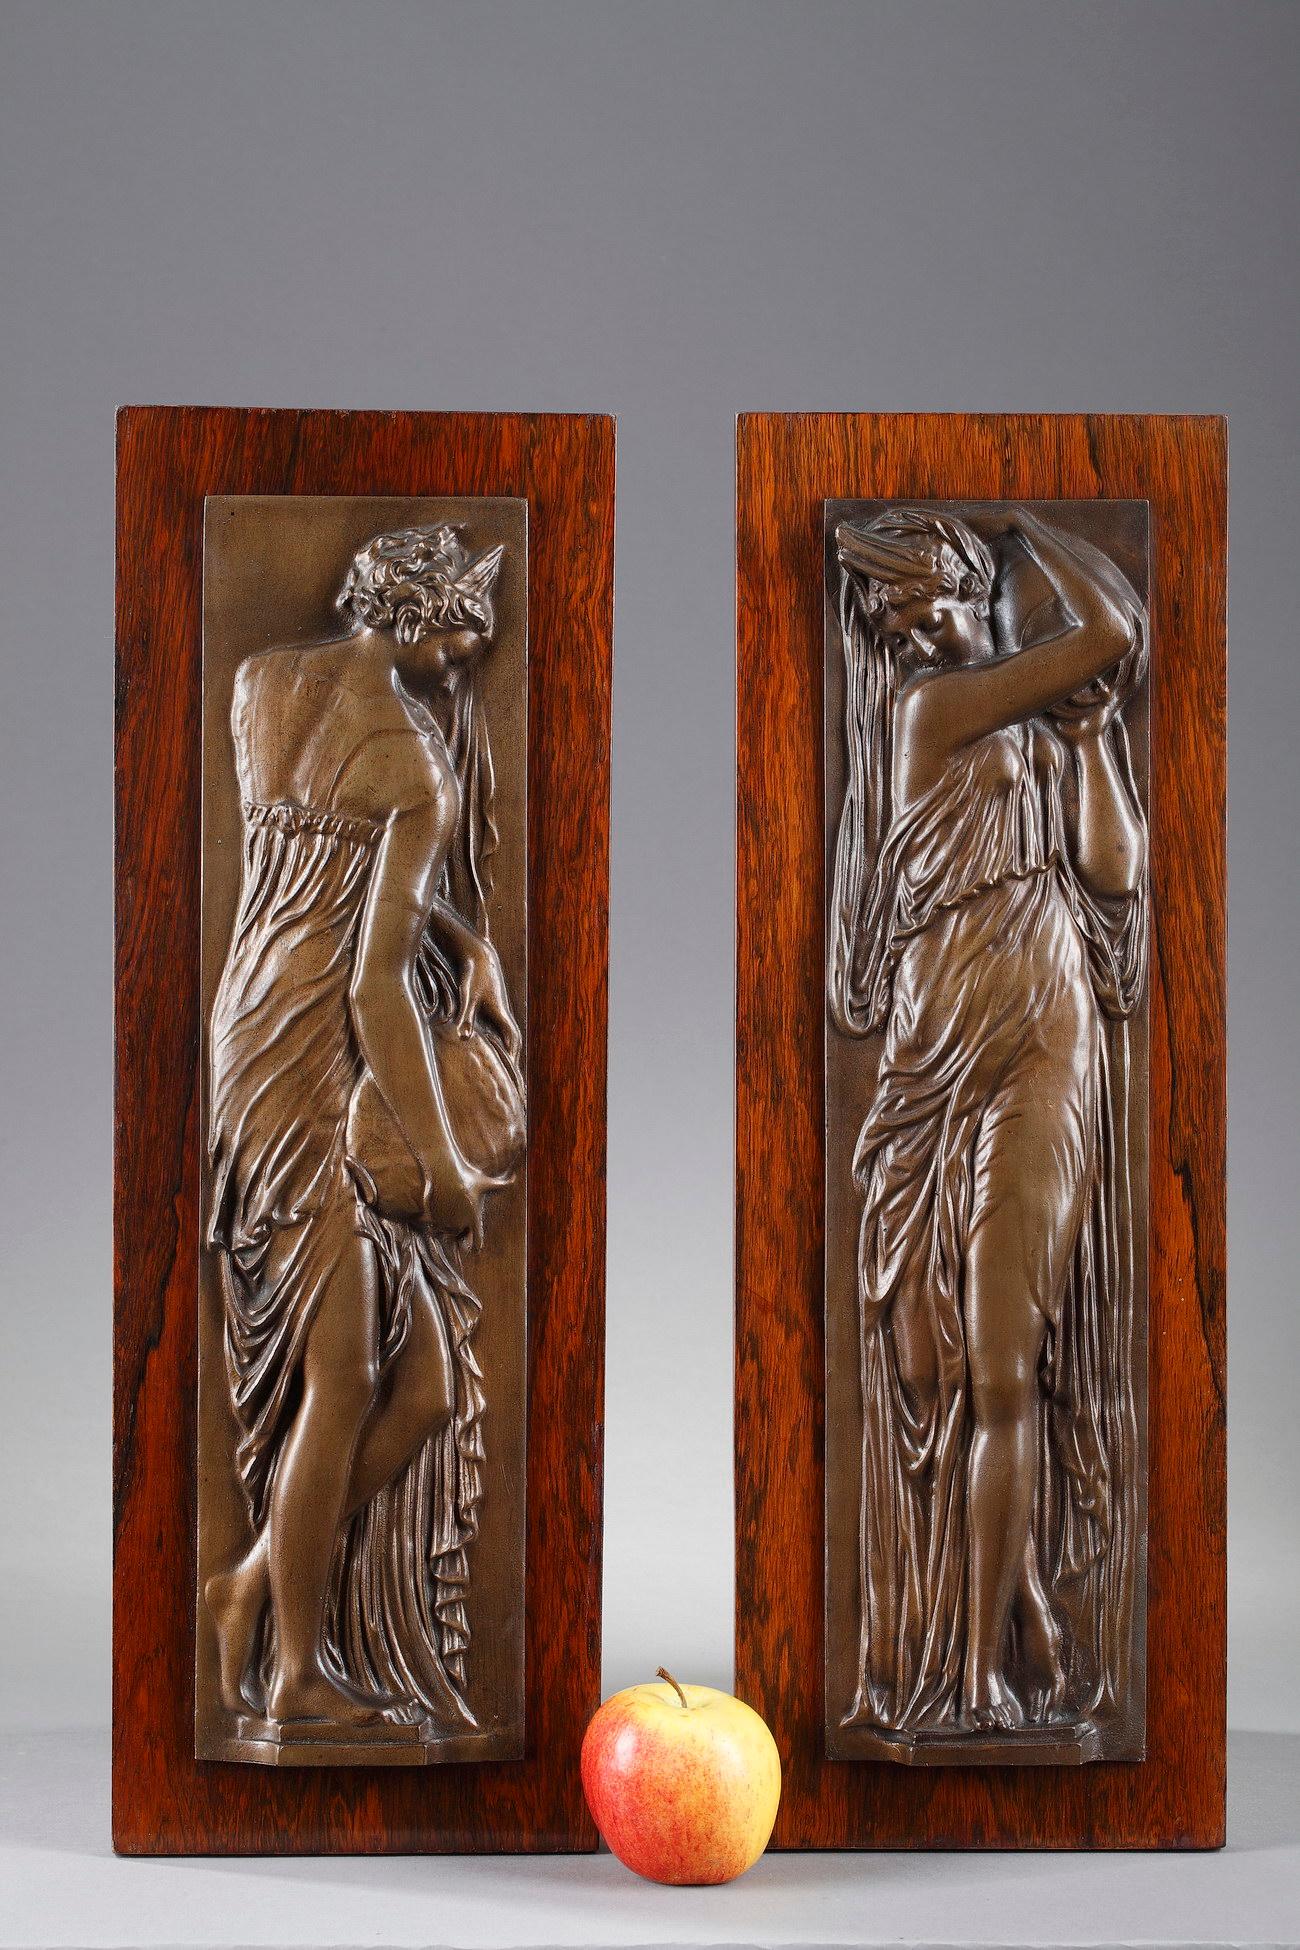 Pair of bronze bas-relief from the end of the 19th century, with brown patina, fixed on a wood veneer support, representing two women draped in the antique style carrying a jar. One is delicately pouring water from her jar, and the other, is